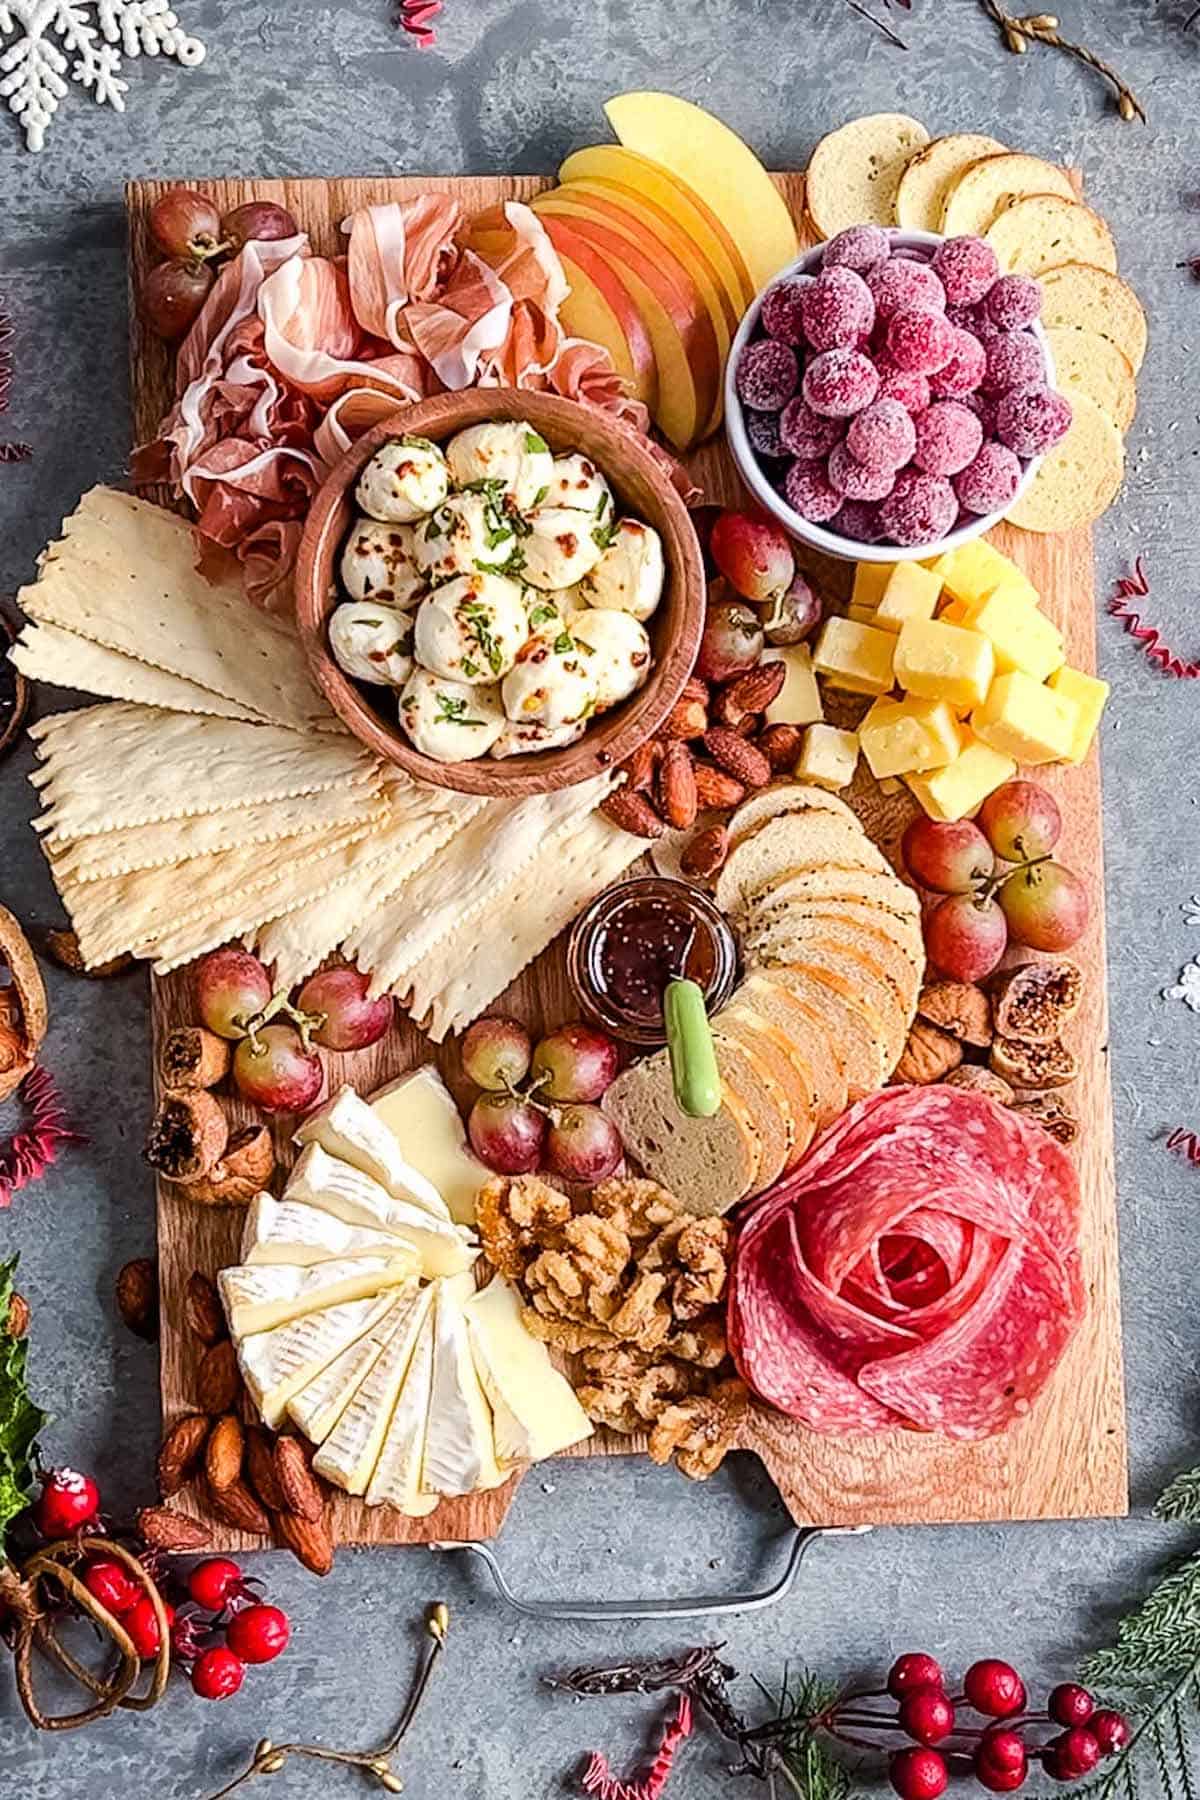 Christmas charcuterie board with 3 cheeses, salami rose, folded proscuitto, sugared cranberries, apple slices, red grapes, walnuts, almonds, and dried figs